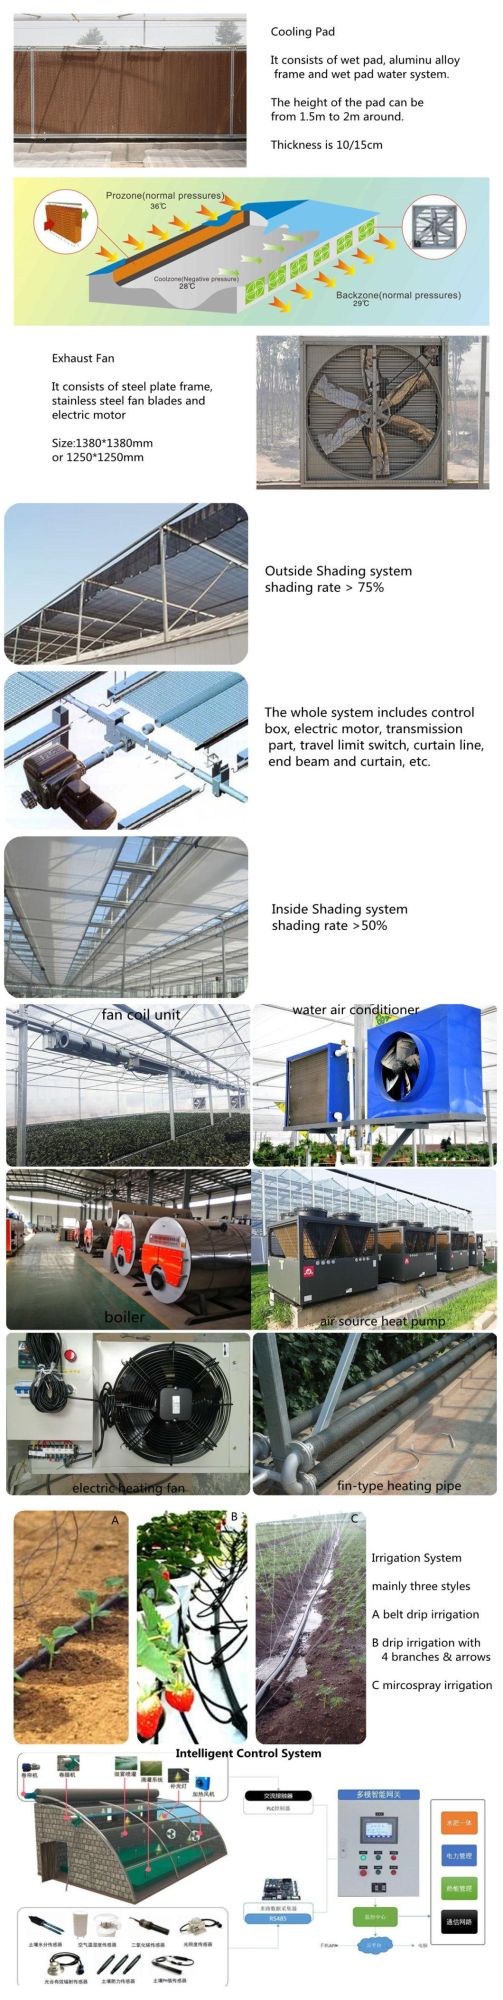 High Quality Lower Price Pneumatic Seedling Machine and Watering Station for Seedling Trays Sowing for Modern Agriculture/Easy Farming